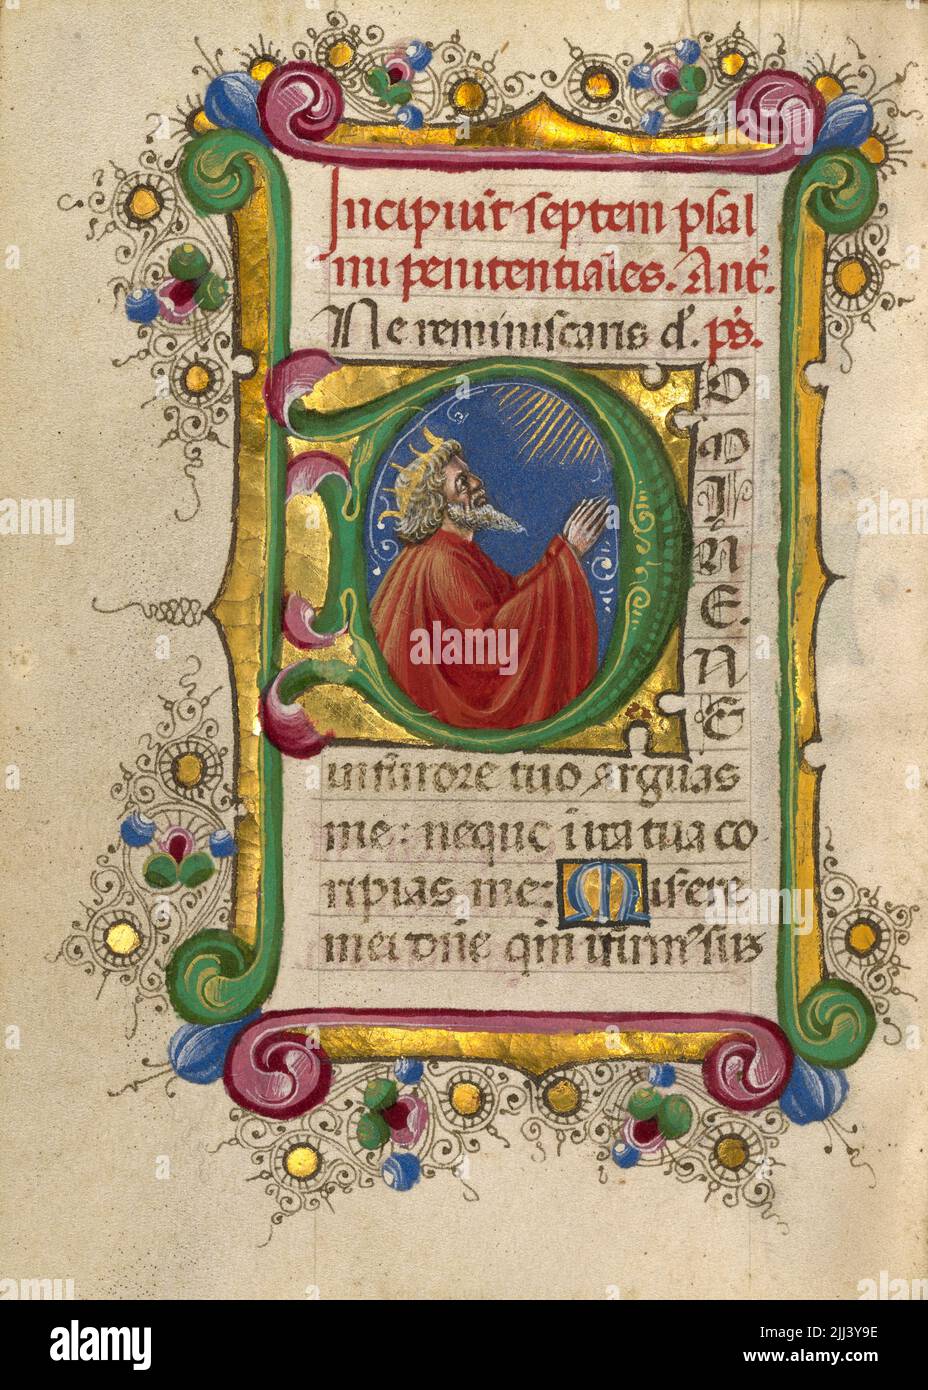 Initial D: David in Prayer; Taddeo Crivelli (Italian, died about 1479, active about 1451 - 1479); about 1469; Tempera colors, gold paint, gold leaf, and ink on parchment; Leaf: 10.8 × 7.9 cm (4 1/4 × 3 1/8 in.); Ms. Ludwig IX 13 (83.ML.109), fol. 78v; No Copyright - United States (http://rightsstatements.org/vocab/NoC-US/1.0/) Stock Photo